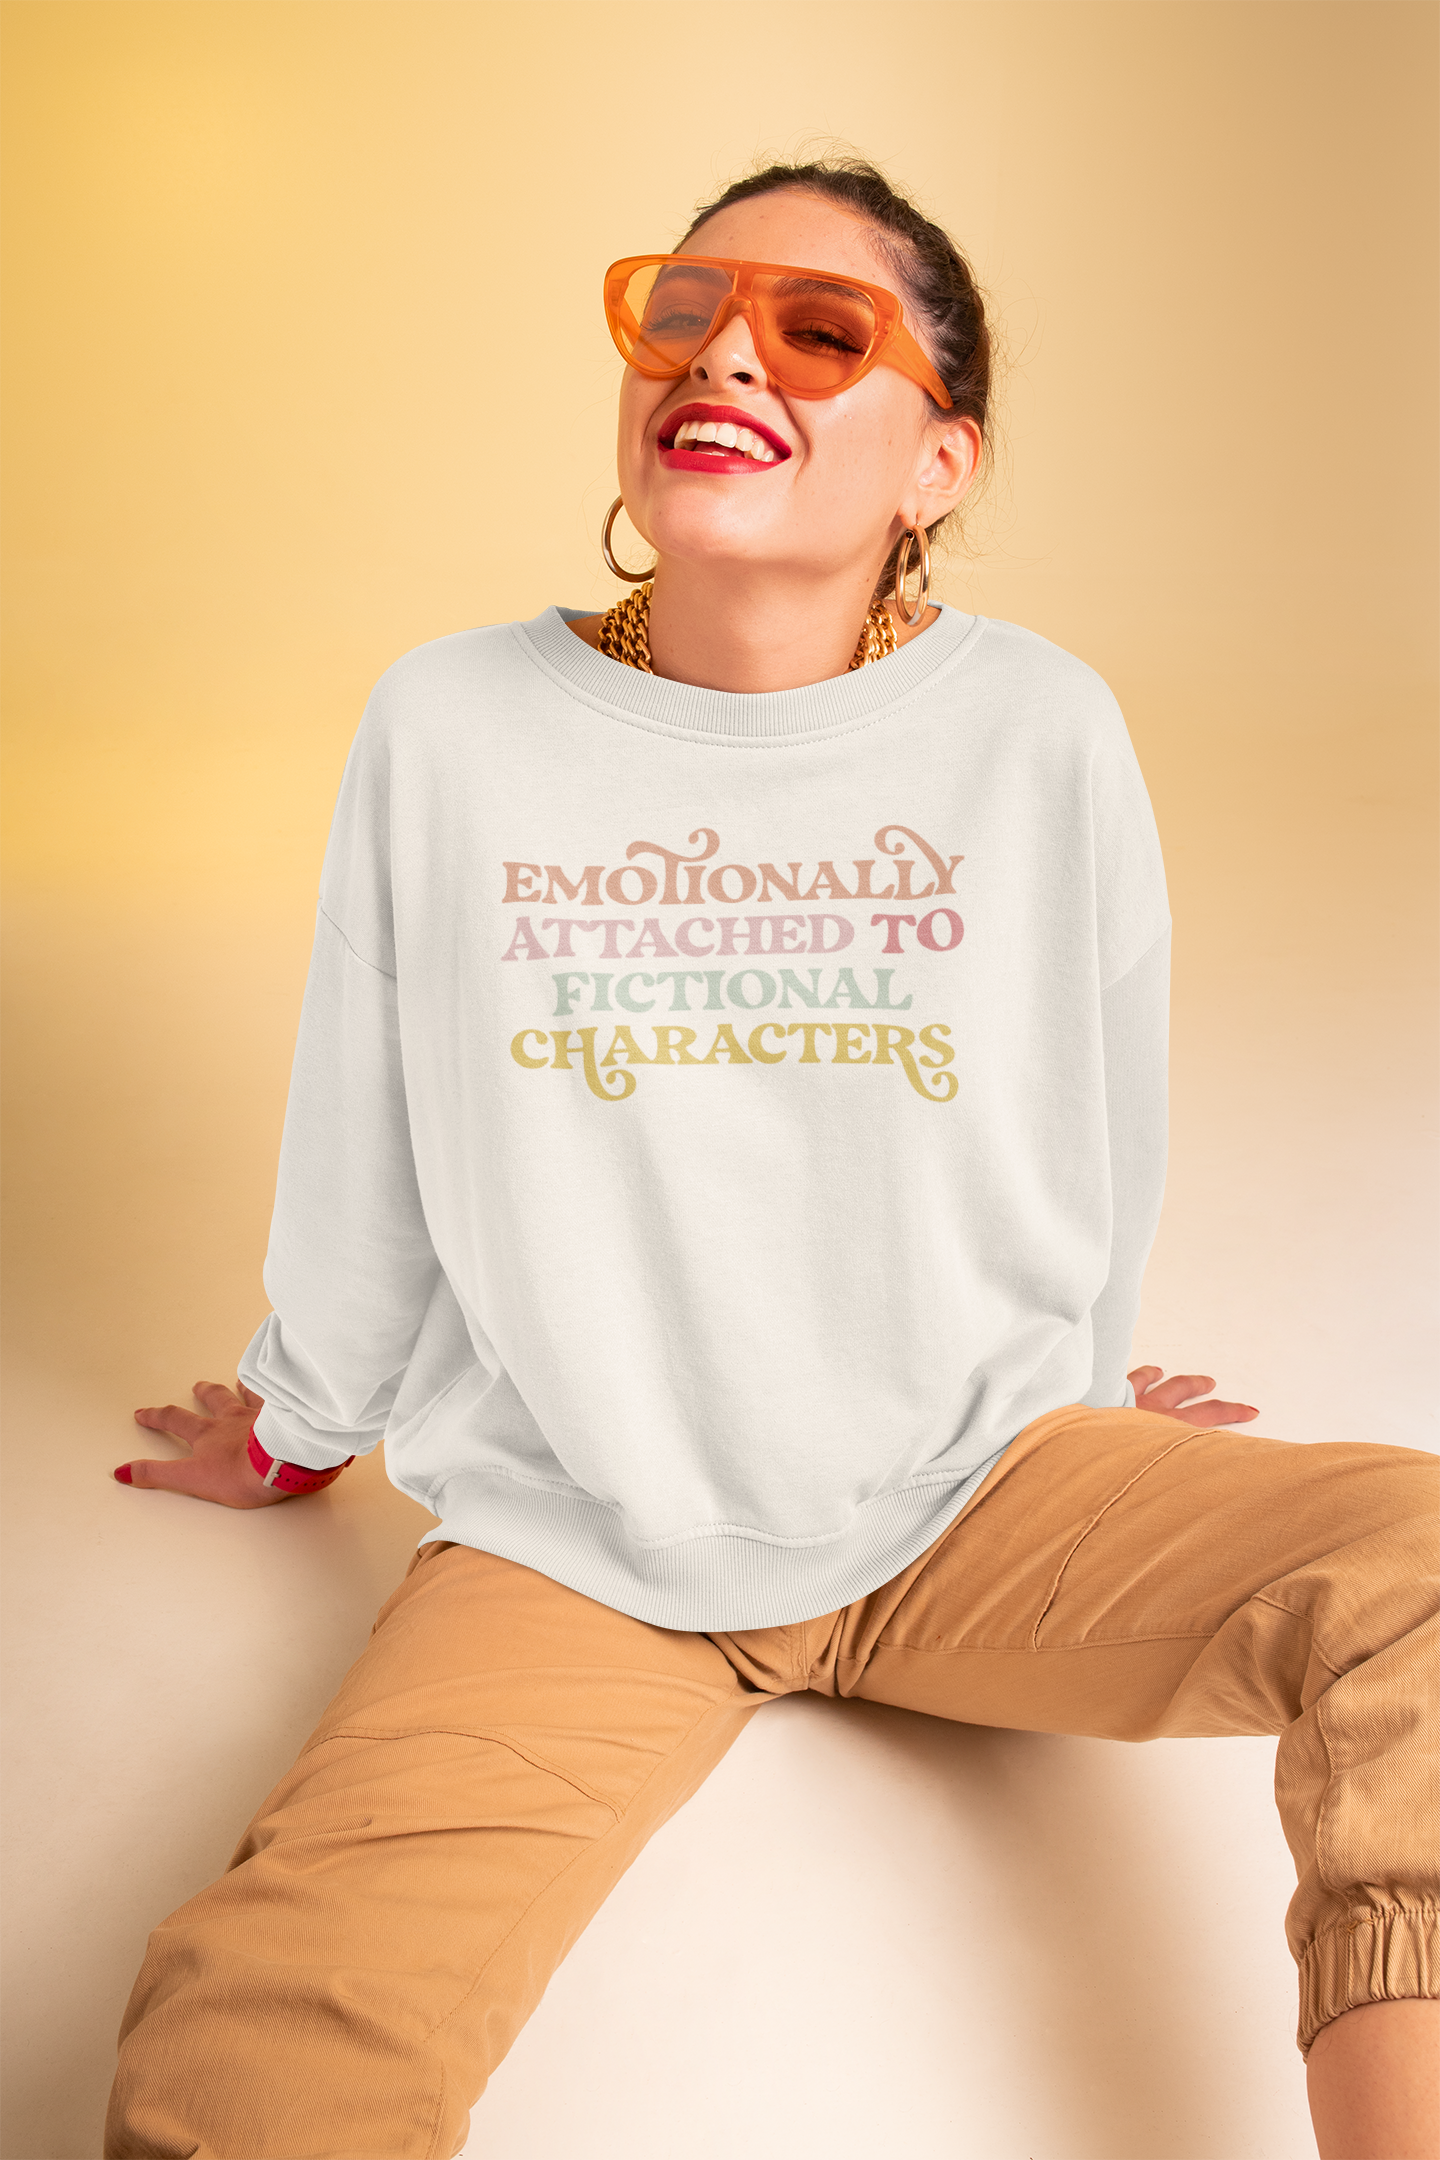 Emotionally Attrached to Fictional Characters SVG Digital Download Design File